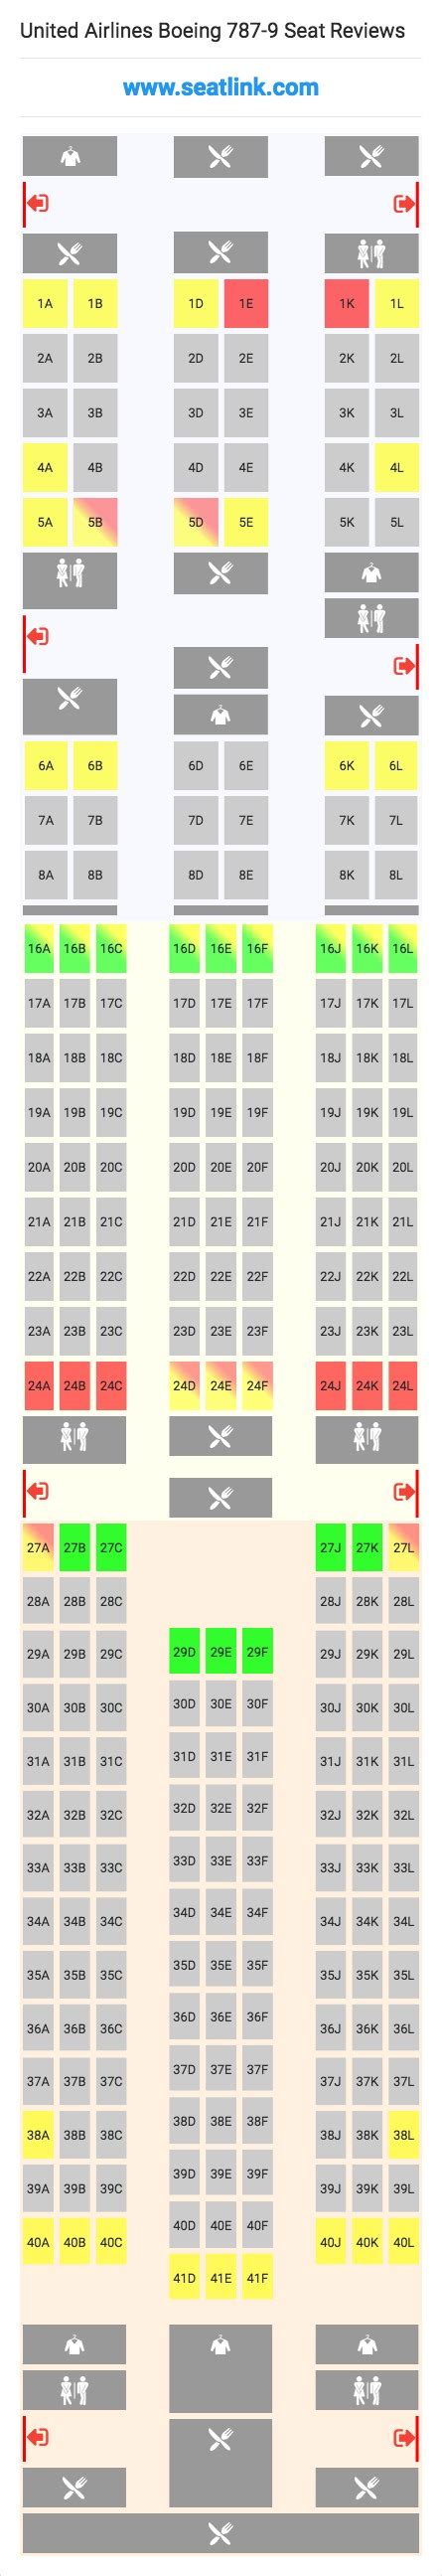 American Airlines Seat Map 787 9 Review Home Decor